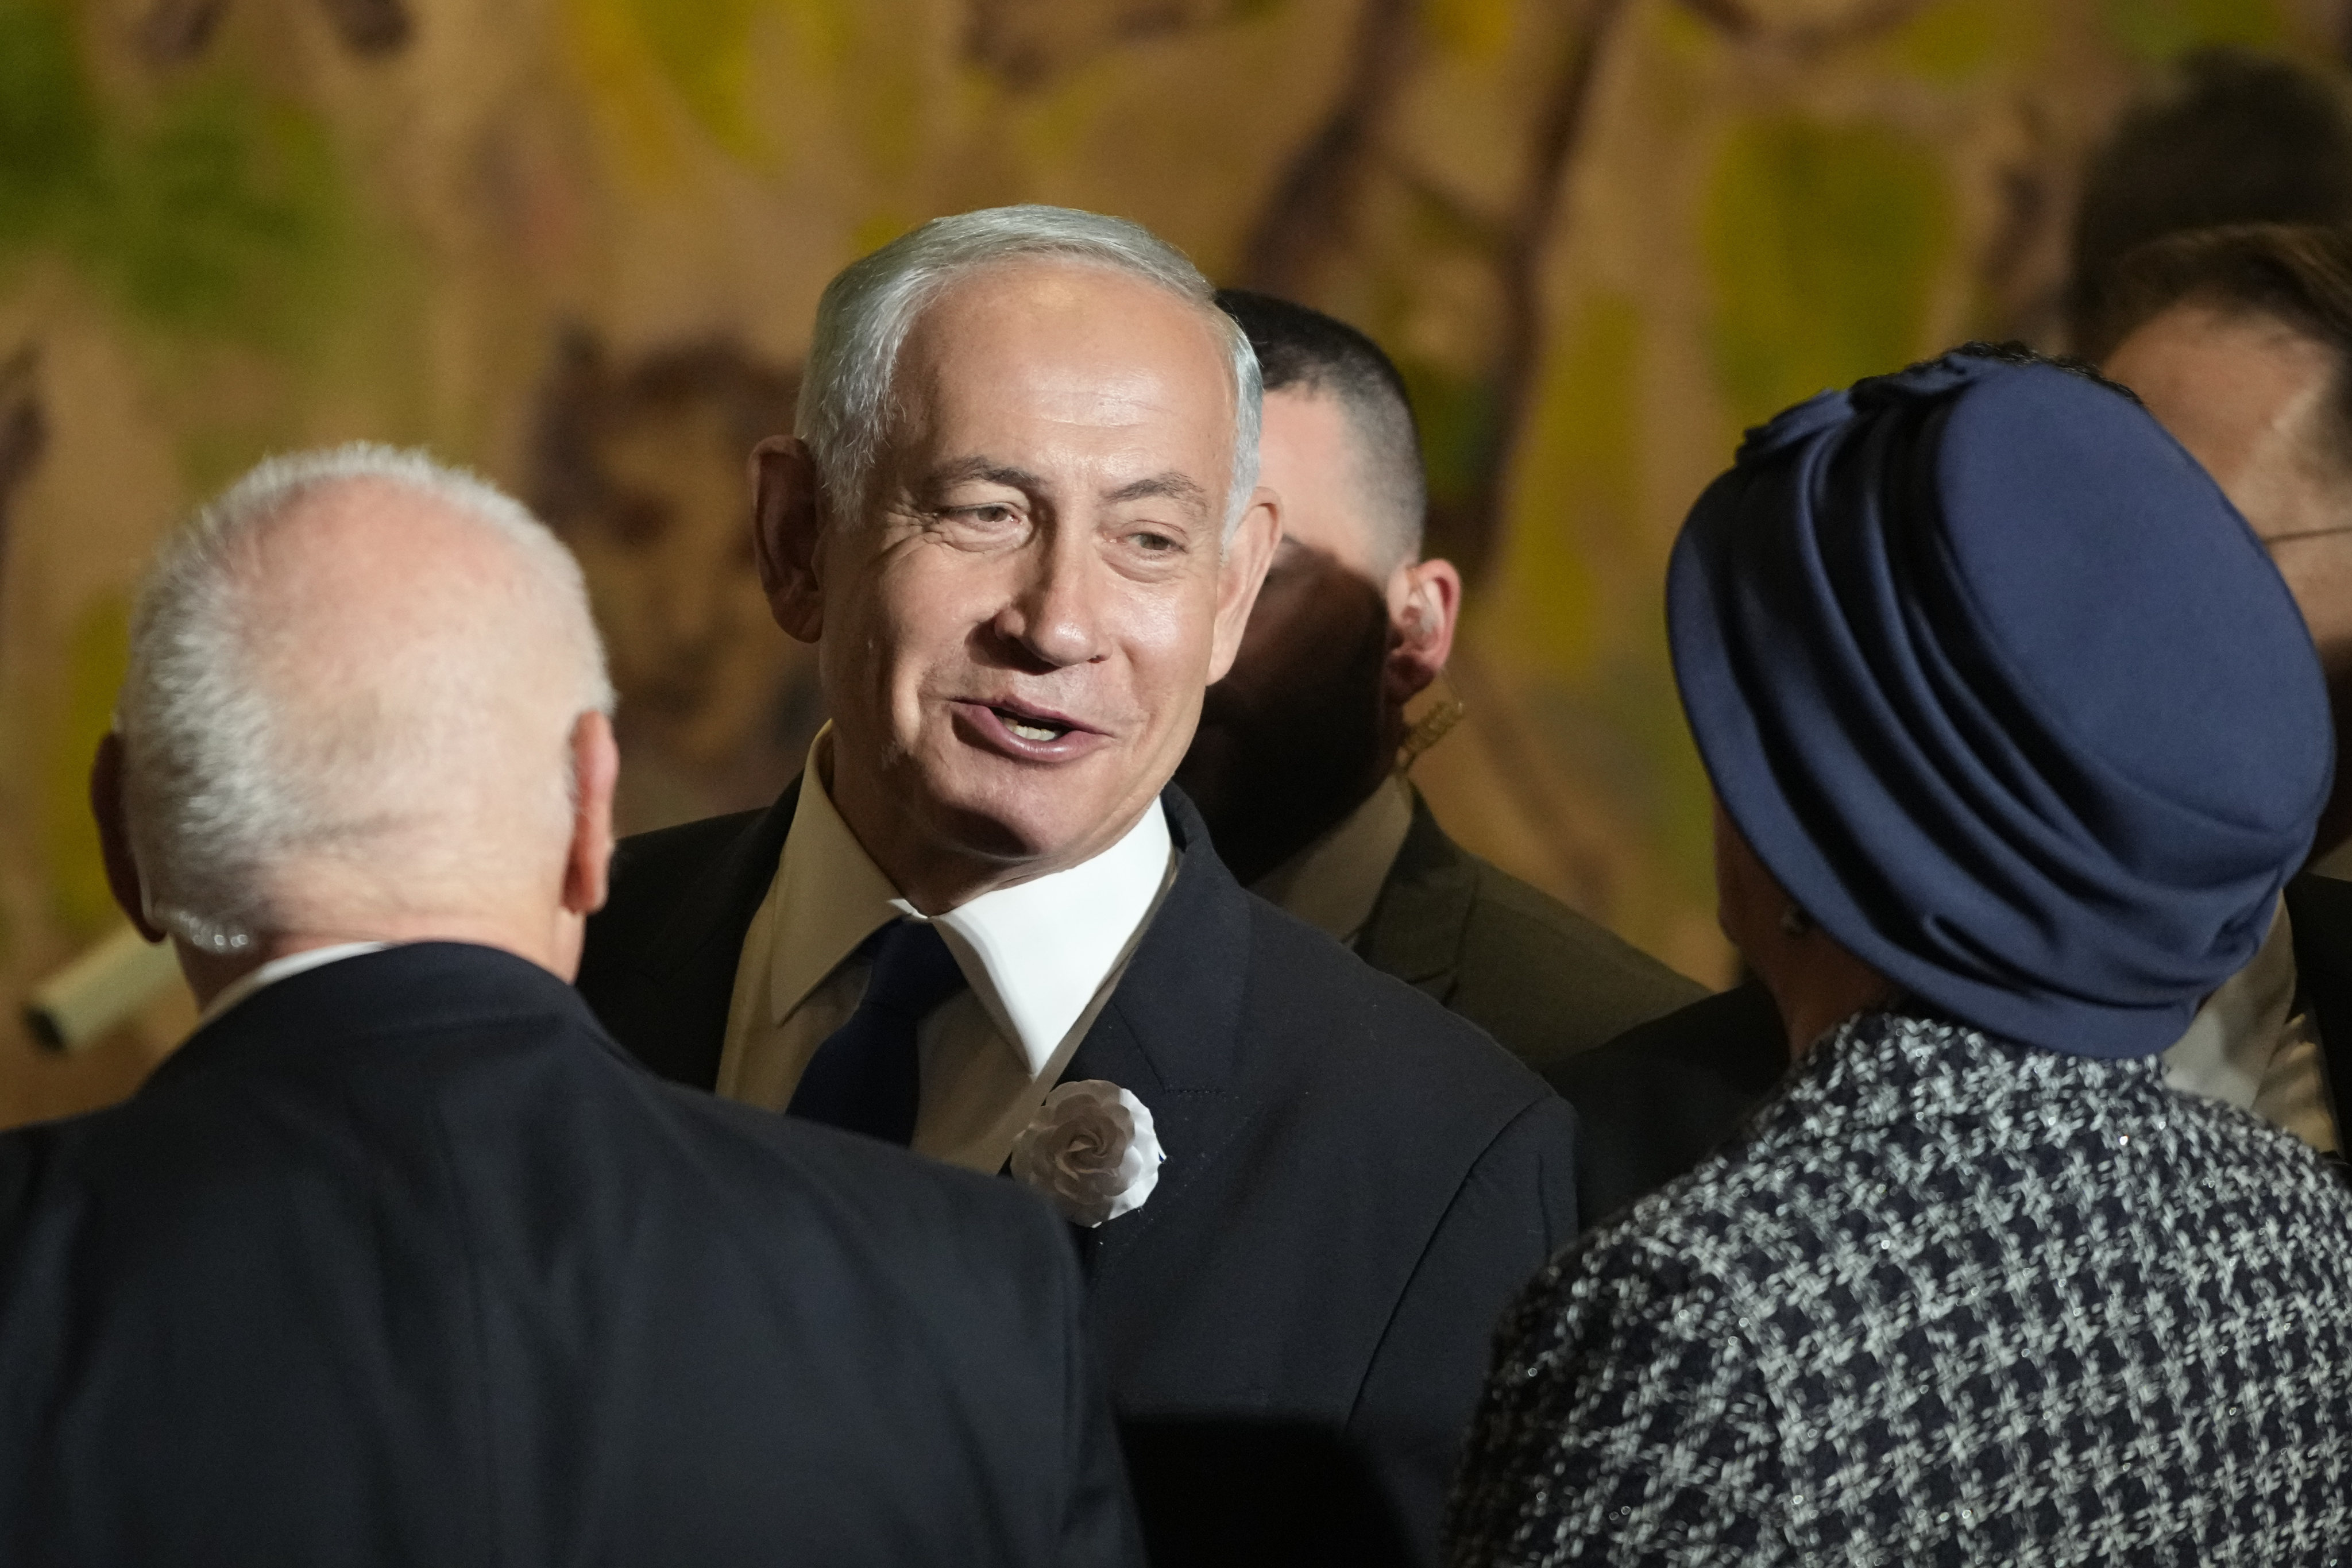 Israel’s prime minister-designate Benjamin Netanyahu arrives at the swearing-in ceremony for Israeli politicians at the Knesset, Israel’s parliament, in Jerusalem, Israel on Tuesday. Photo: AP 